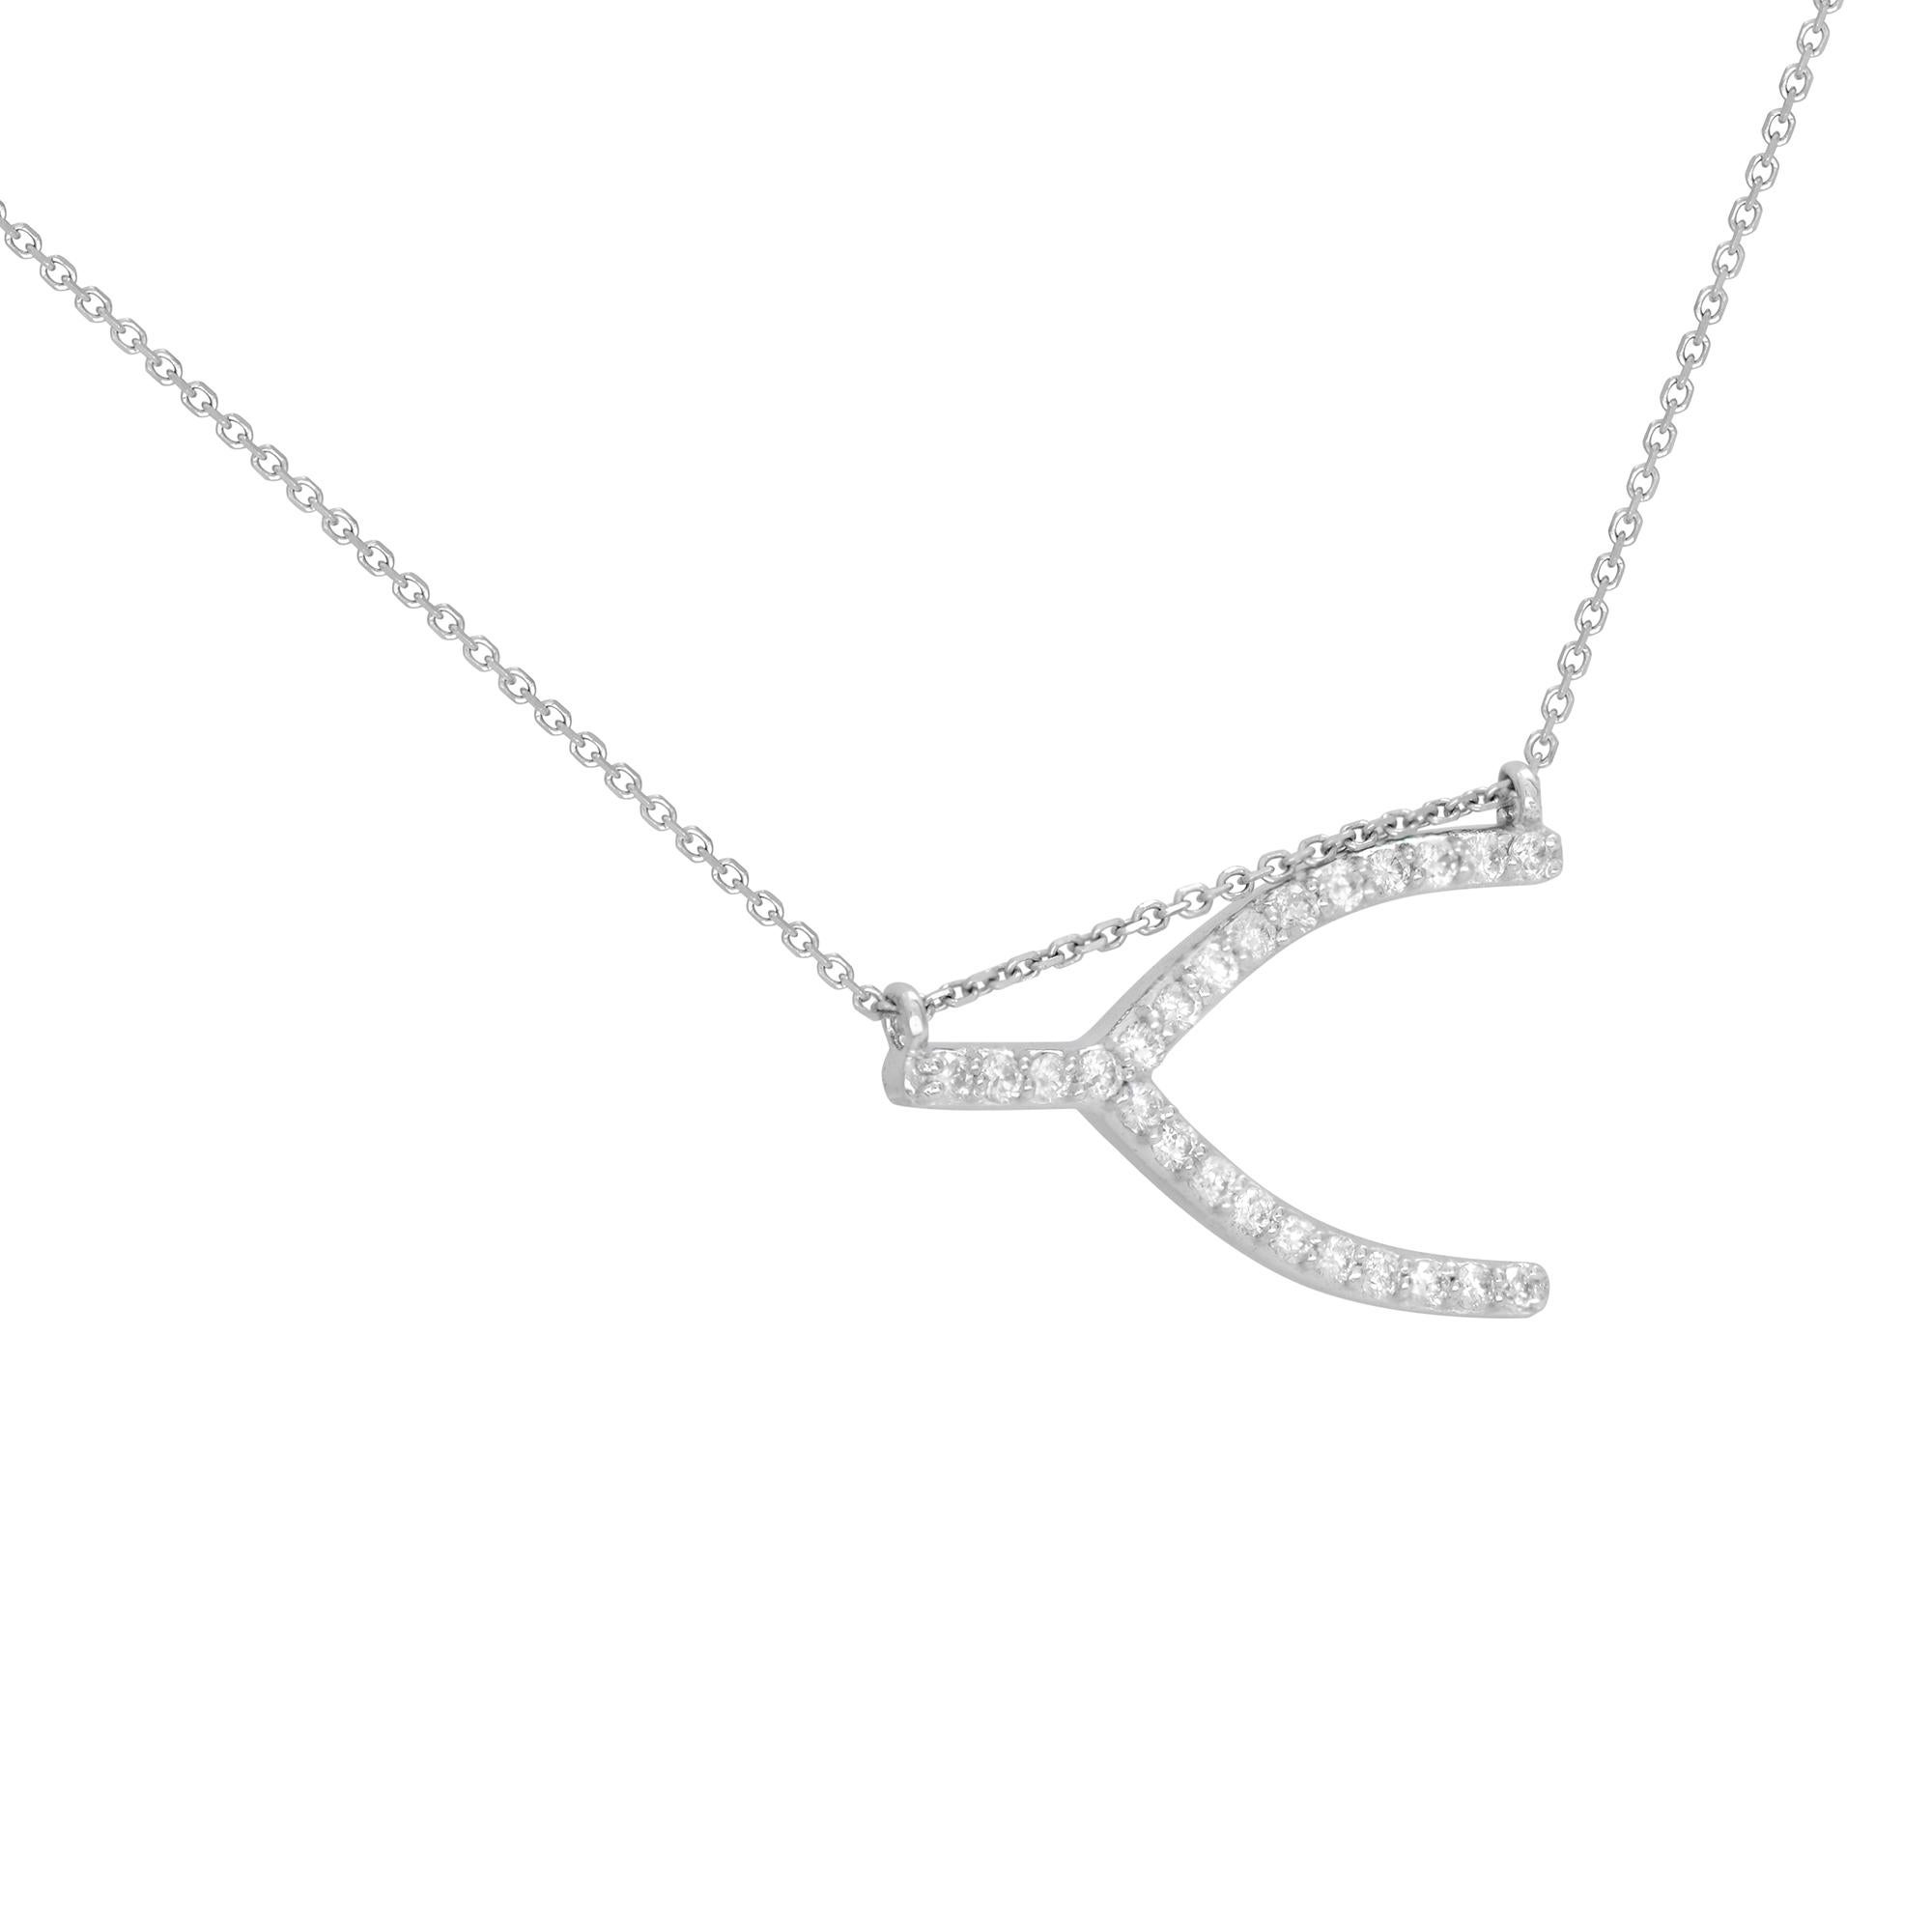 A delicate sideway diamond wishbone necklace crafted in 14k white gold. Encrusted with 0.24 carat of round tiny white diamonds. Diamond color G and VS-SI clarity. This necklace symbolizes good fortune and hope. Chain length: 18 inches. Comes with a